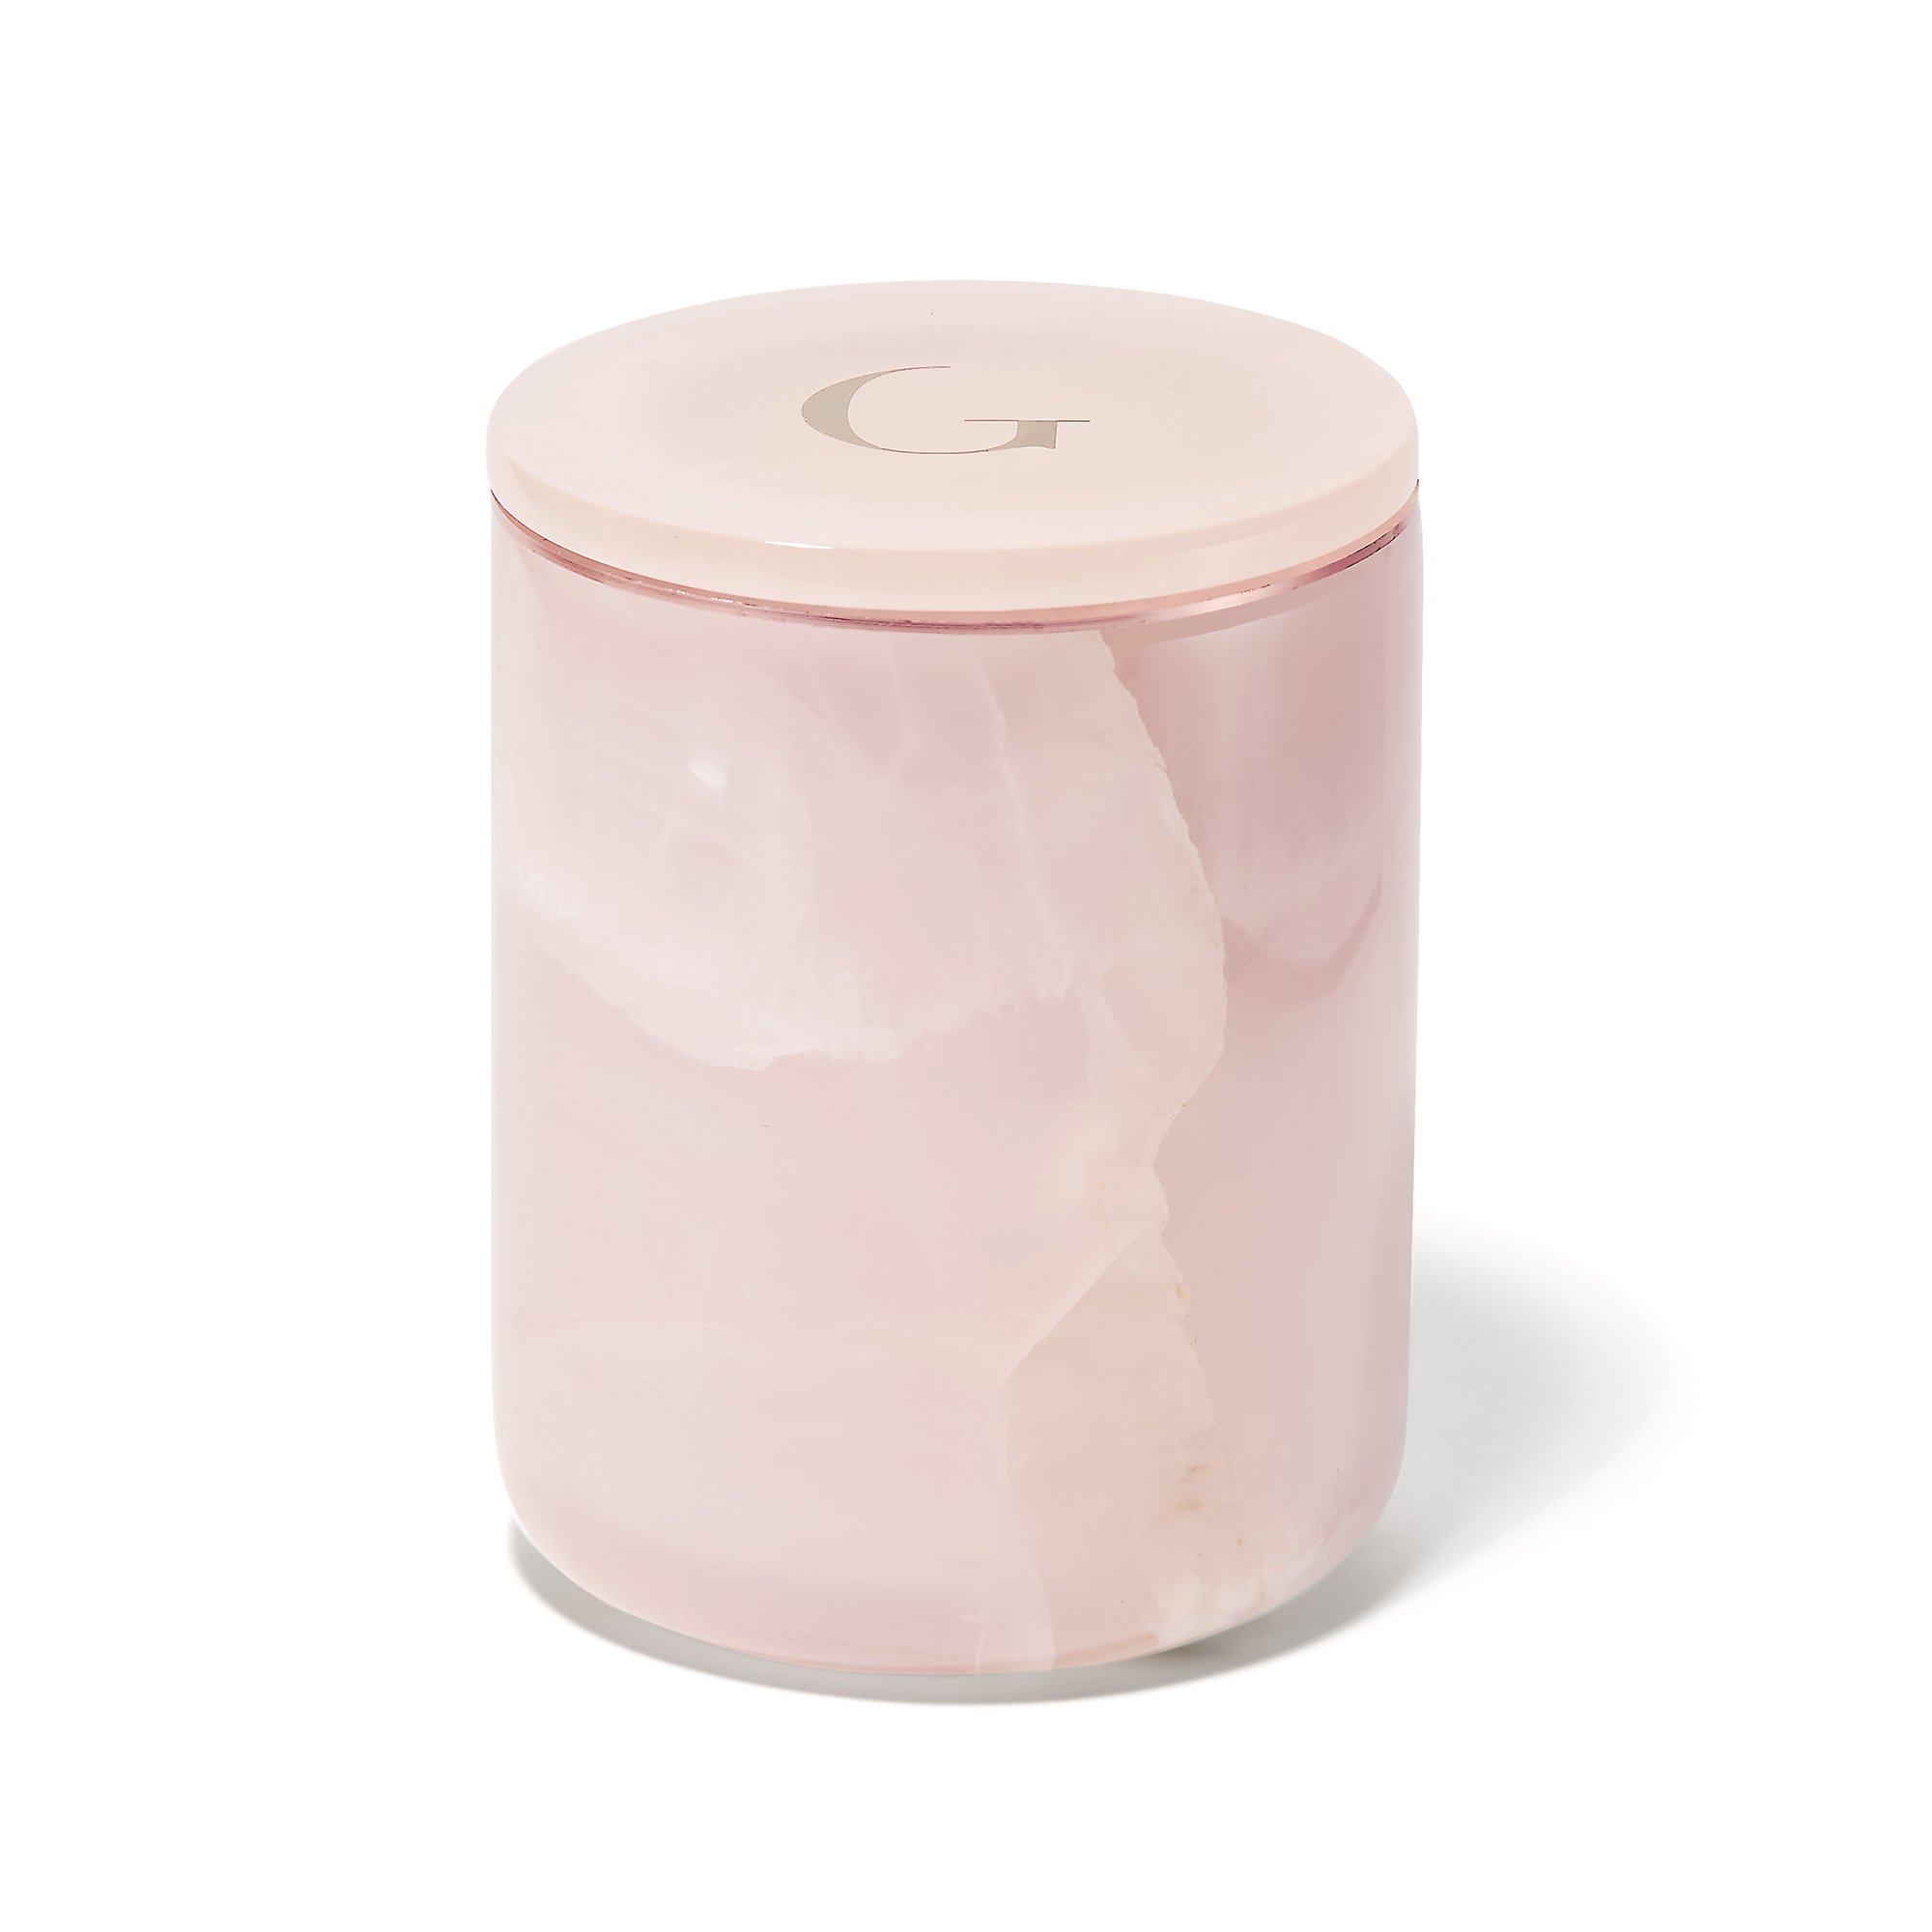 Gilded Body Marble Candle, eco-friendly gifts